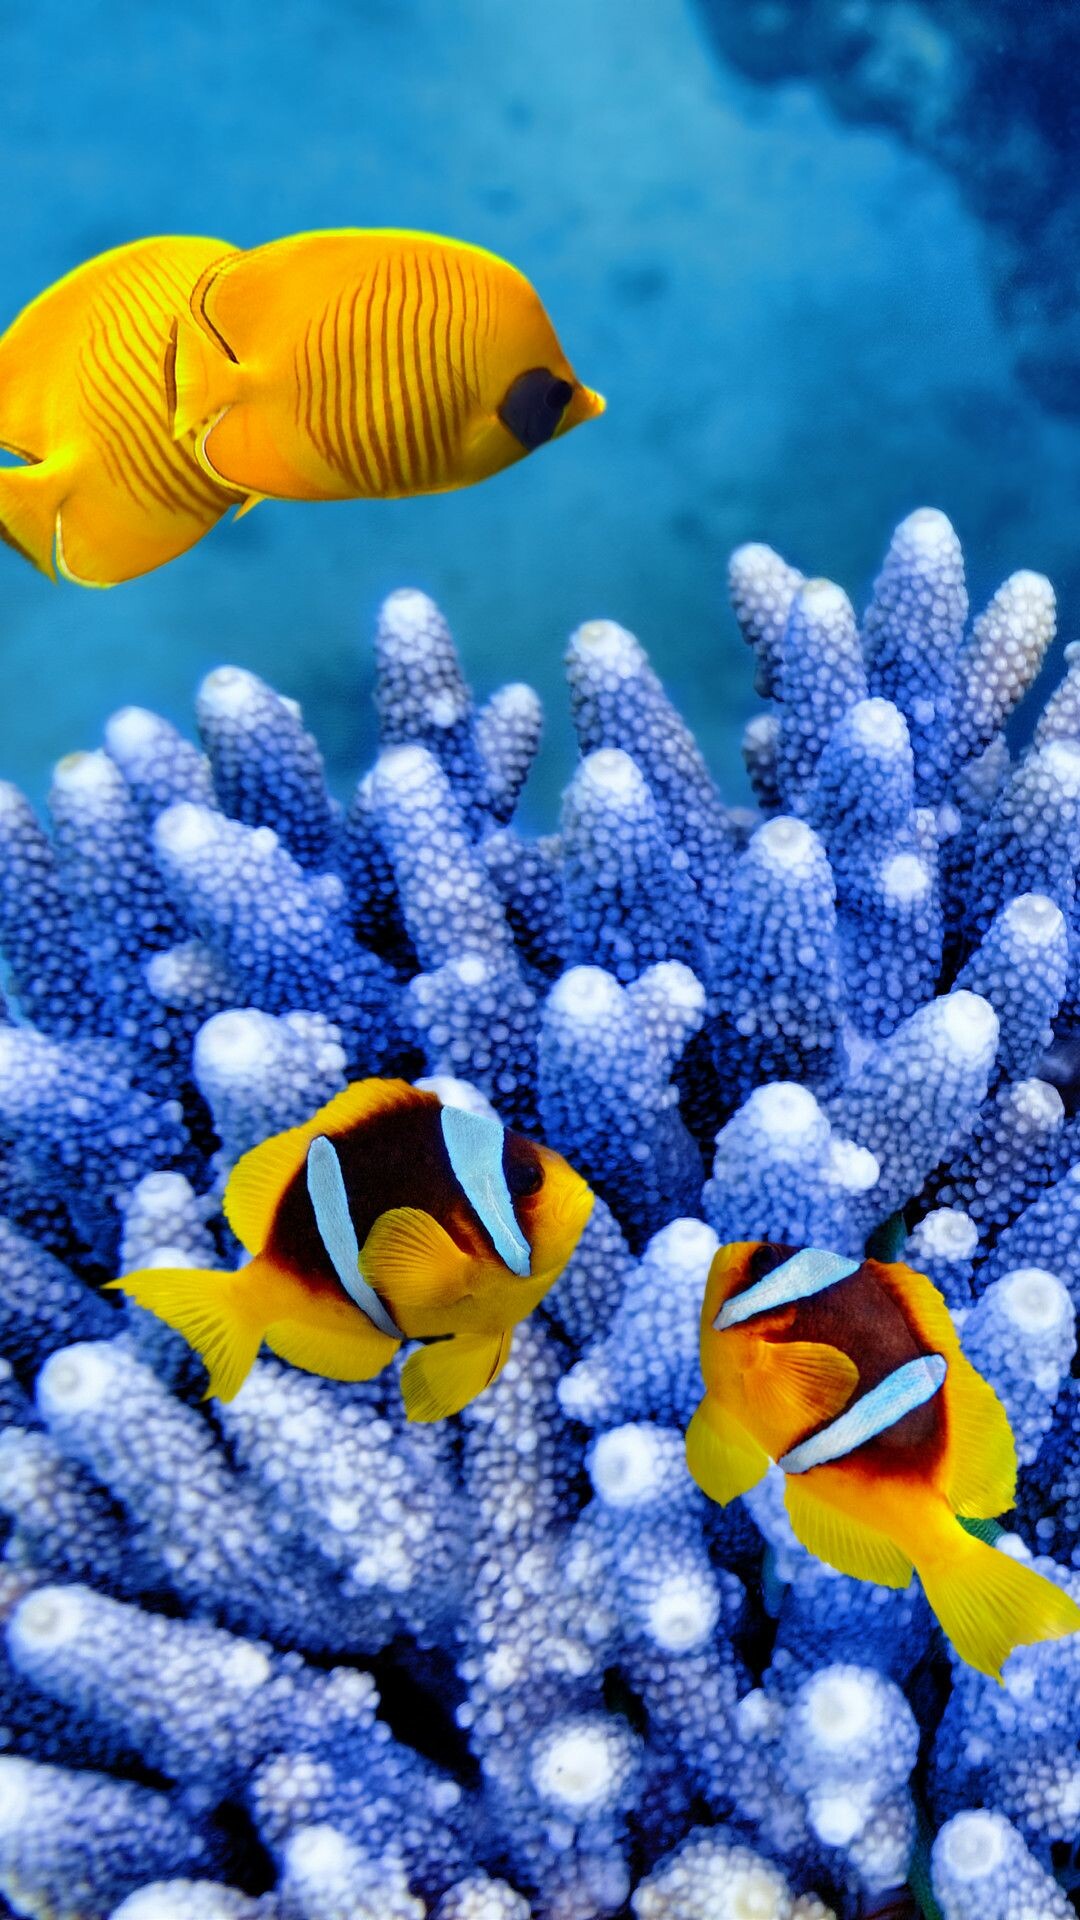 Coral Reef: Scientists estimate that 25 percent of all marine species live in and around reefs, making them one of the most diverse habitats in the world. 1080x1920 Full HD Background.